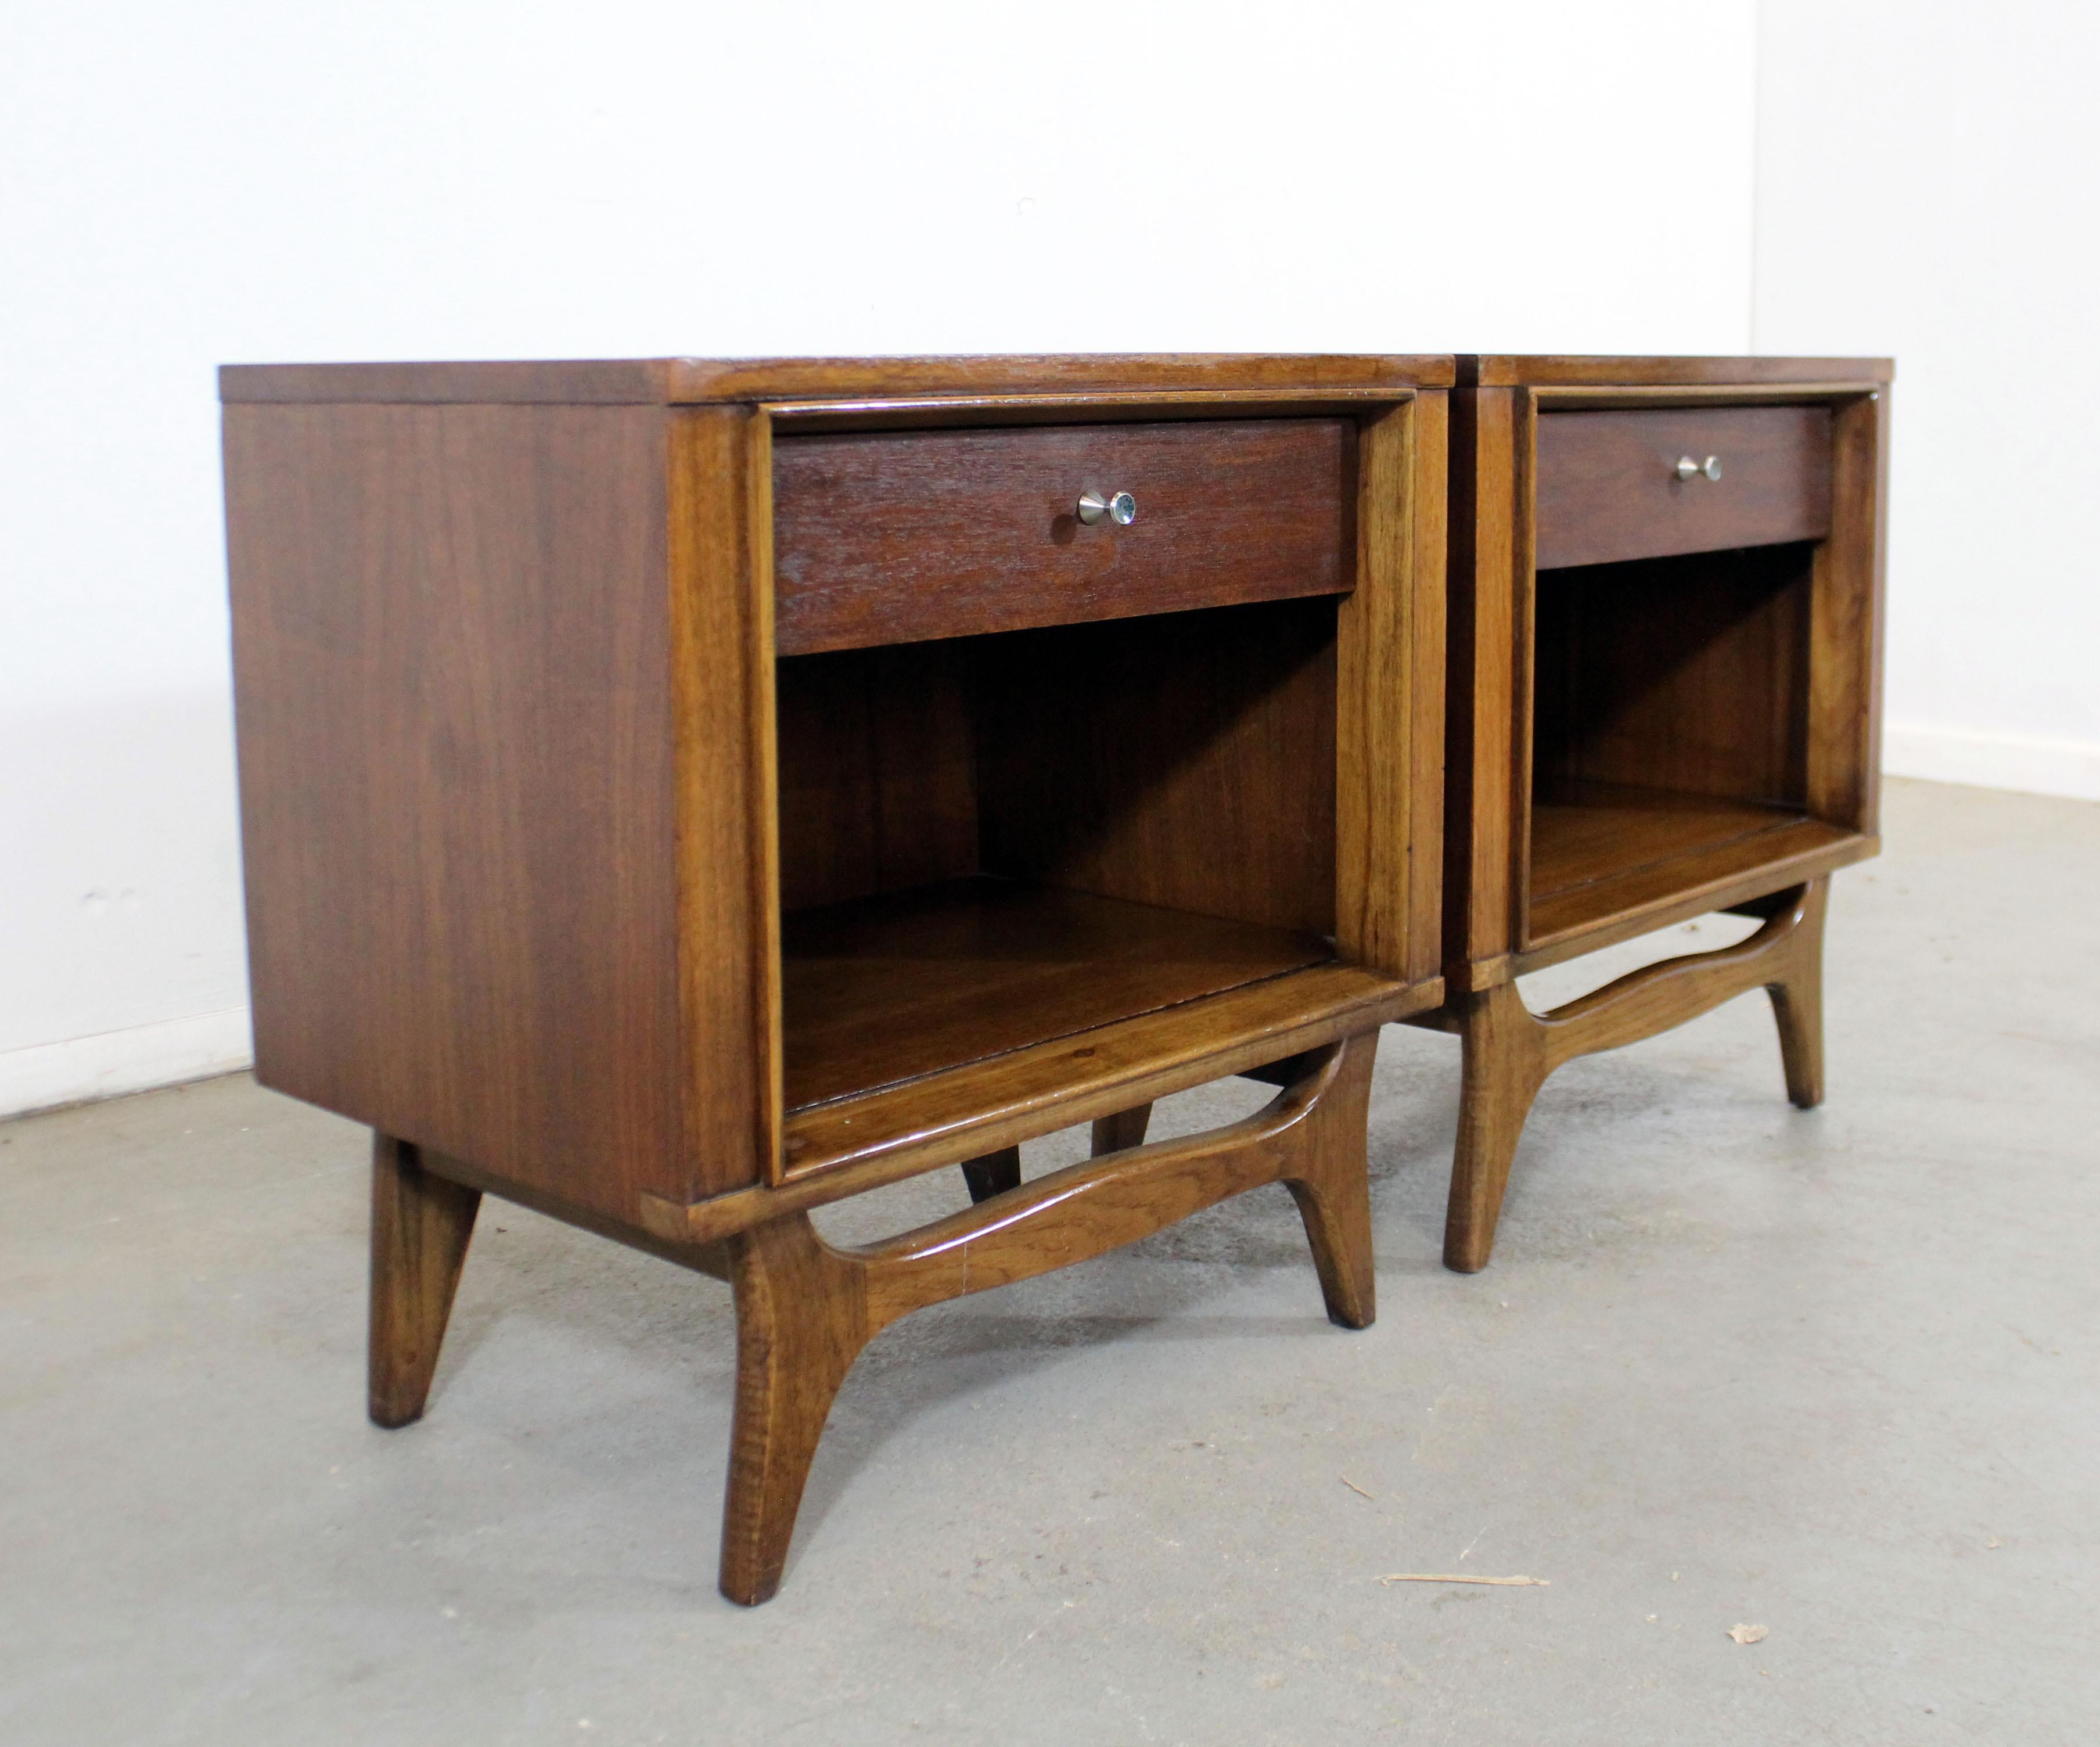 Offered is a pair of Mid-Century Modern nightstands by Kent Coffey's 'Insignia' line. This set is made of walnut, with each featuring one dove-tailed drawer and open storage cabinet. They are in good condition, showing minor age wear (previous